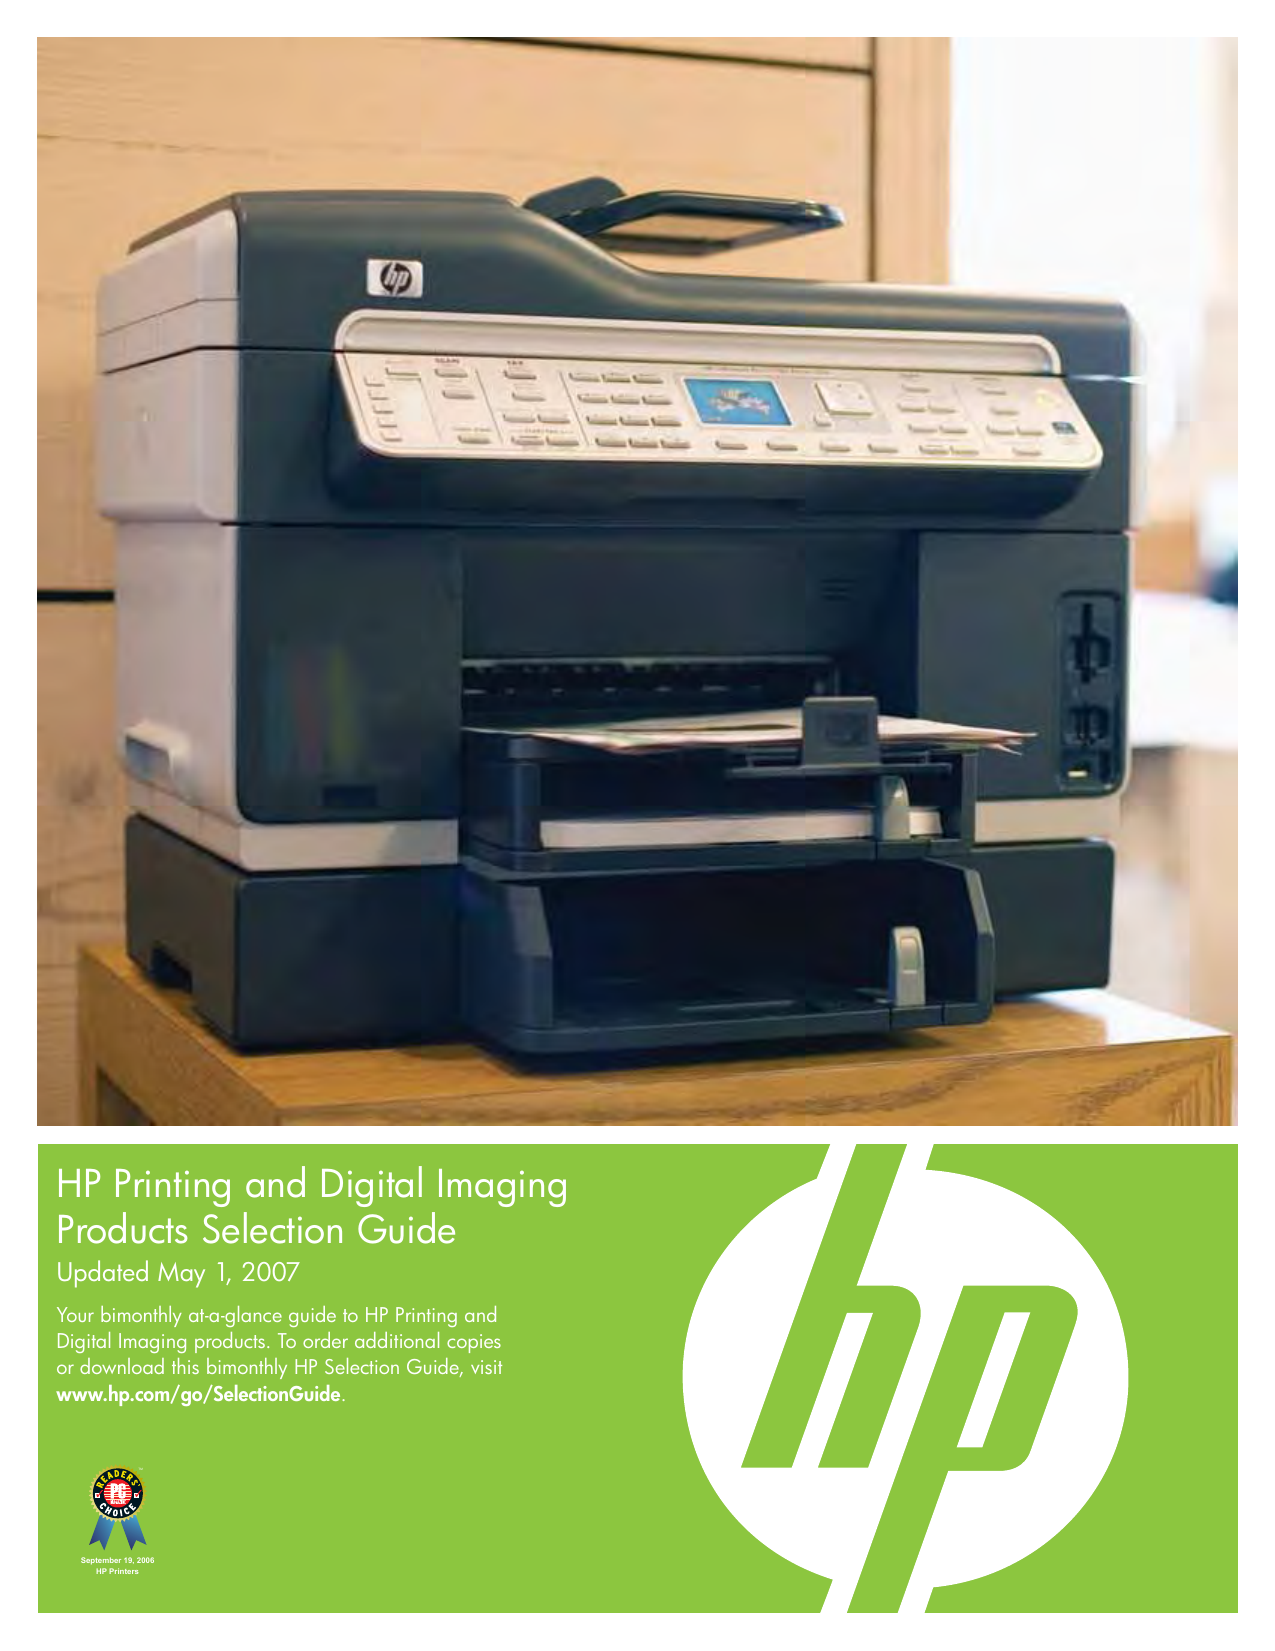 Hp Printing And Digital Imaging Products Selection Guide Manualzz